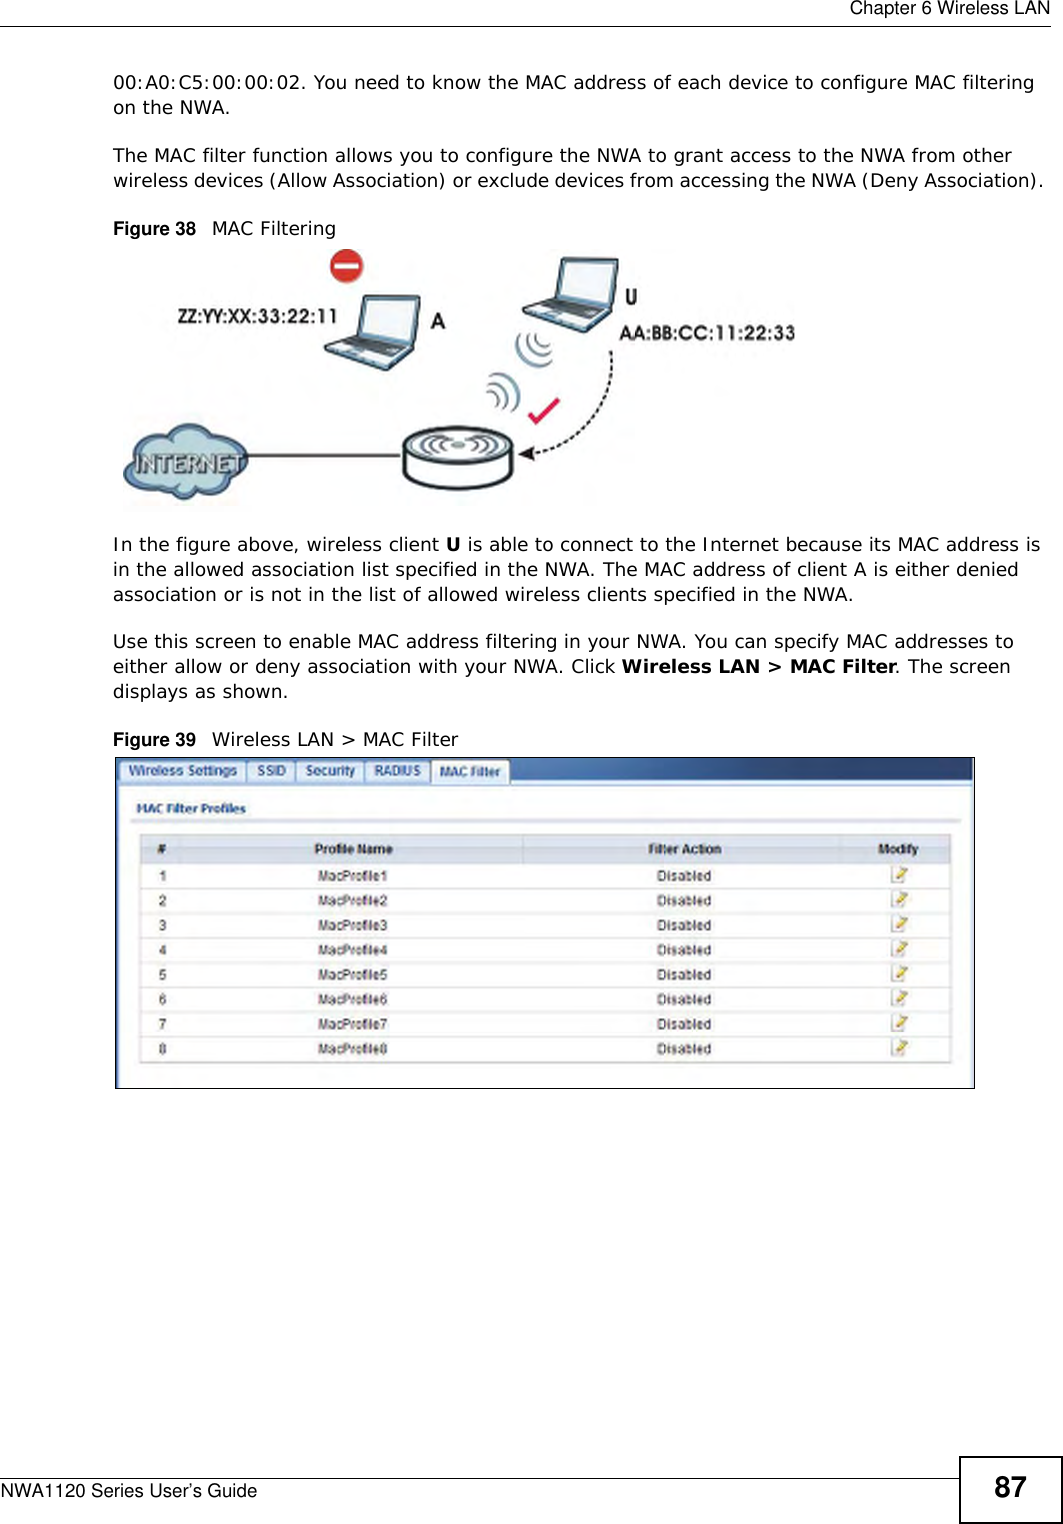  Chapter 6 Wireless LANNWA1120 Series User’s Guide 8700:A0:C5:00:00:02. You need to know the MAC address of each device to configure MAC filtering on the NWA.The MAC filter function allows you to configure the NWA to grant access to the NWA from other wireless devices (Allow Association) or exclude devices from accessing the NWA (Deny Association). Figure 38   MAC Filtering In the figure above, wireless client U is able to connect to the Internet because its MAC address is in the allowed association list specified in the NWA. The MAC address of client A is either denied association or is not in the list of allowed wireless clients specified in the NWA.Use this screen to enable MAC address filtering in your NWA. You can specify MAC addresses to either allow or deny association with your NWA. Click Wireless LAN &gt; MAC Filter. The screen displays as shown. Figure 39   Wireless LAN &gt; MAC Filter